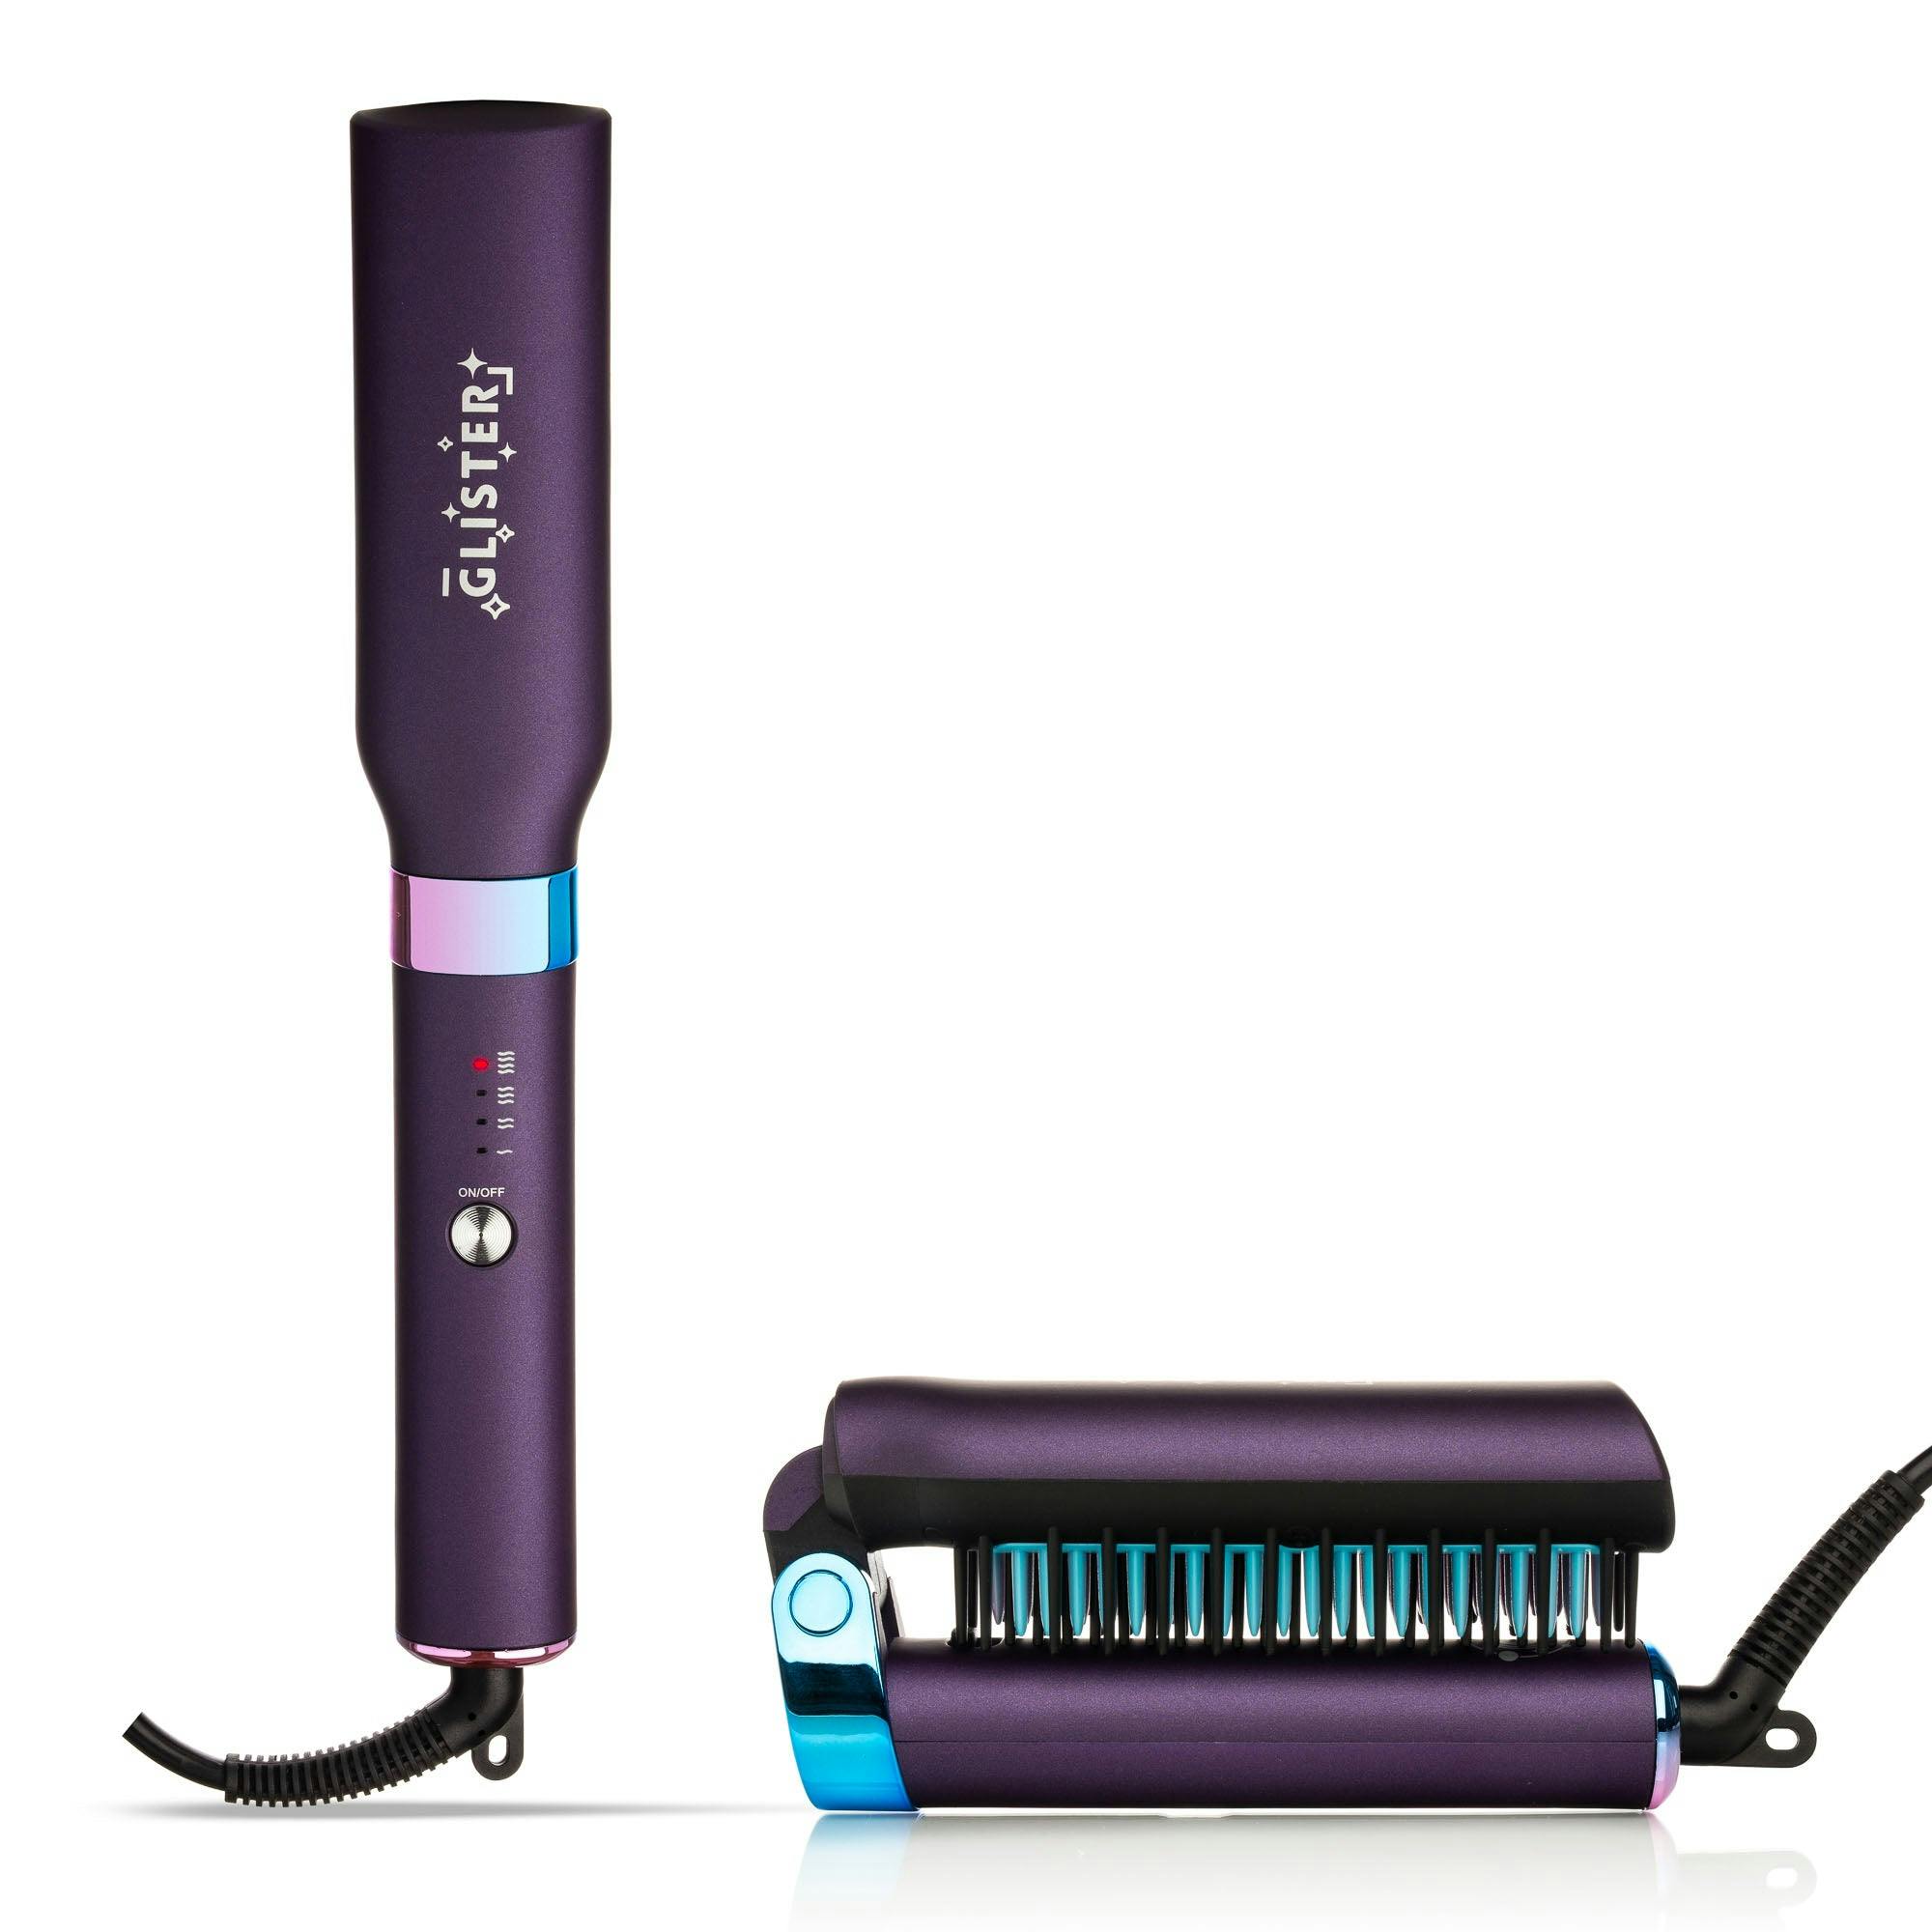 Glister Hot Smoothing Brush Ultra Violet